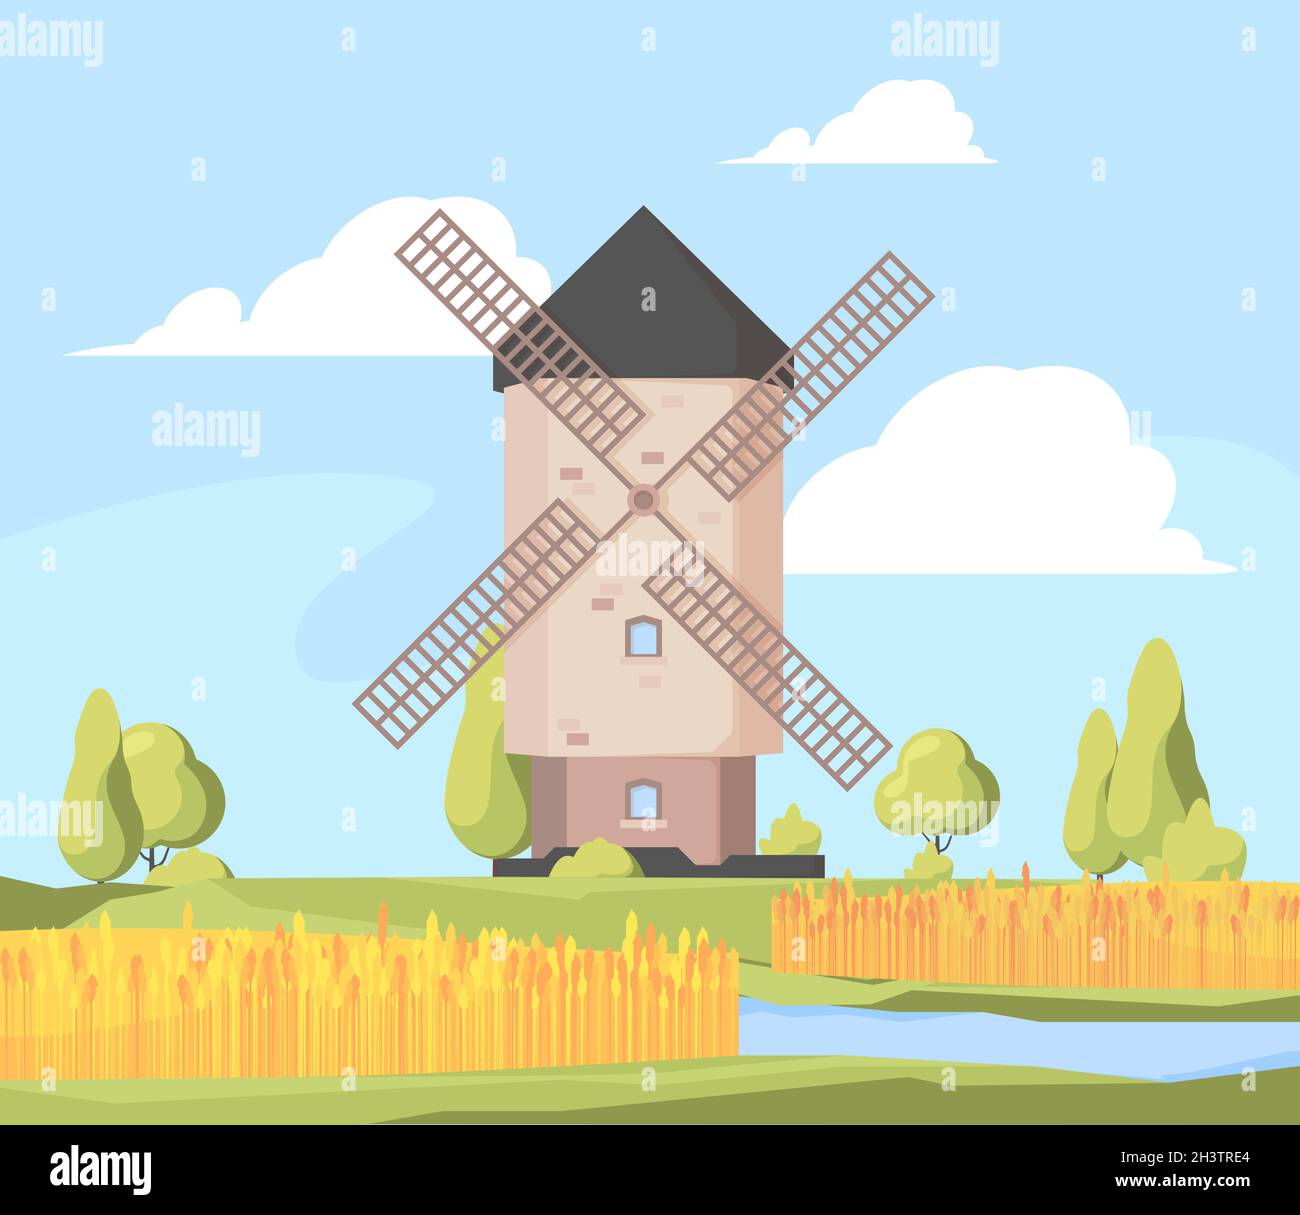 Rural landscape windmill. Farm background with growing wheat field and working windmill vector cartoon illustration Stock Vector